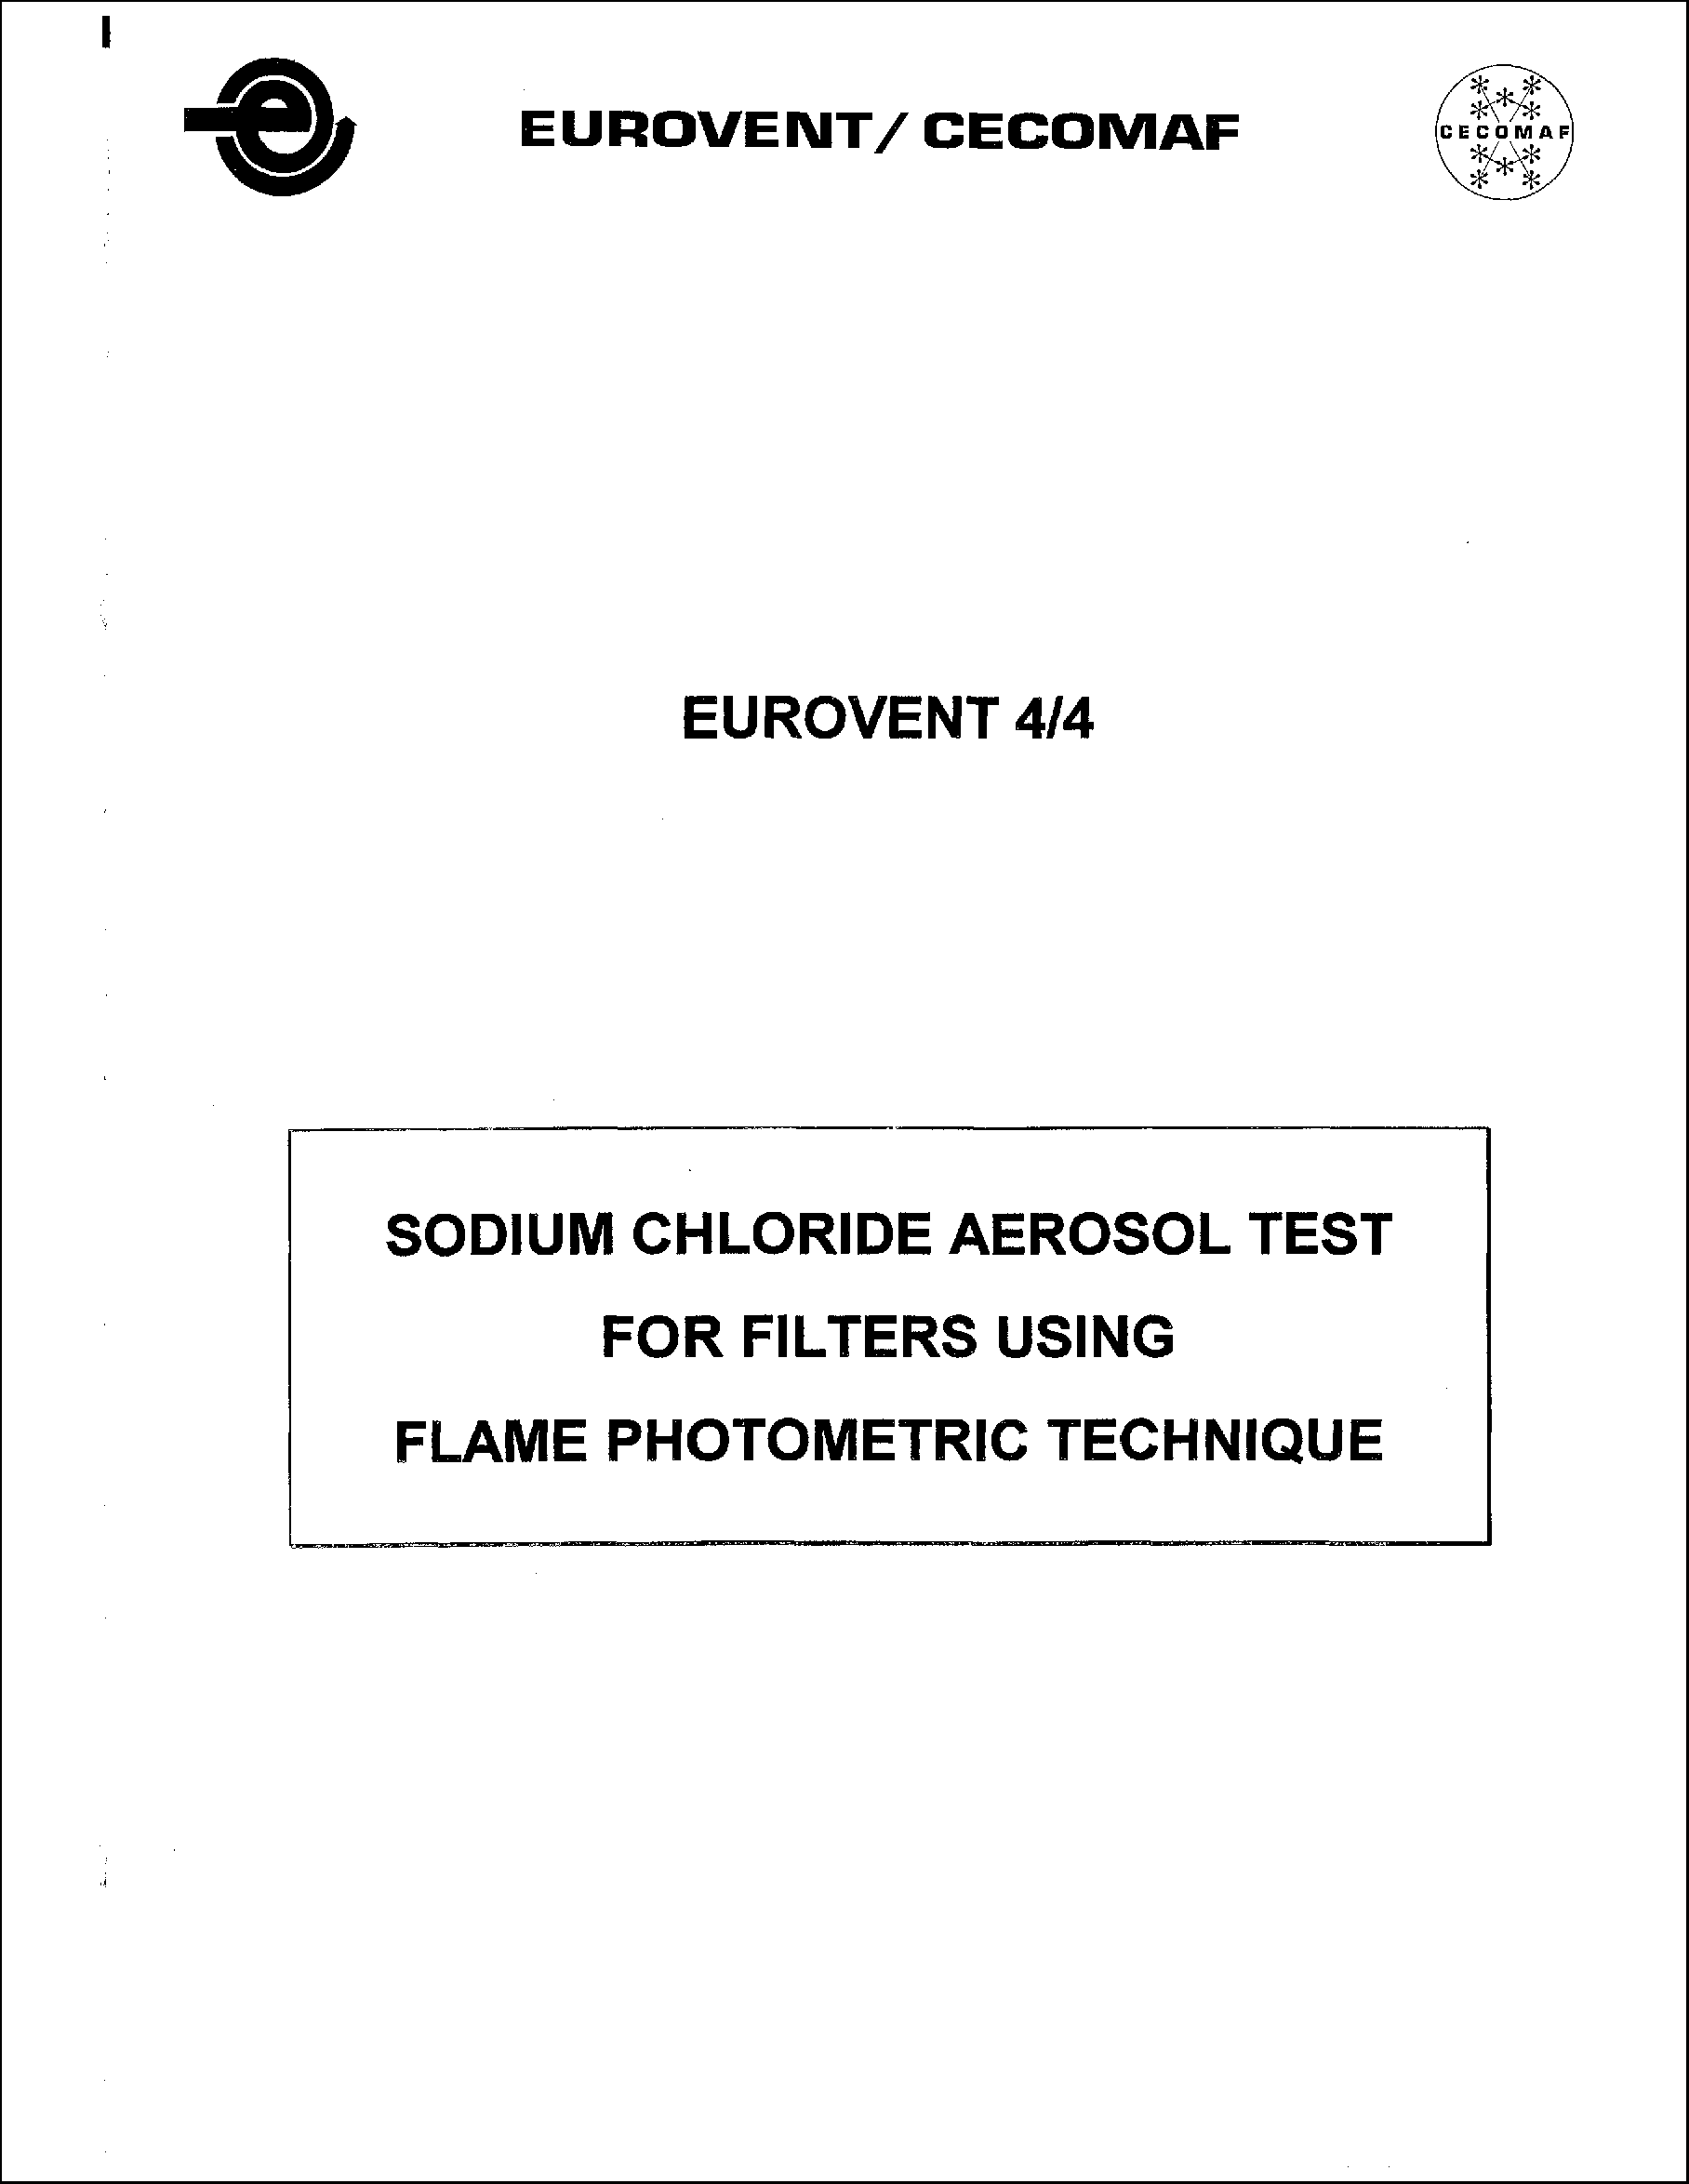 1984 - Sodium chloride aerosol test for filters using flame photometric technique